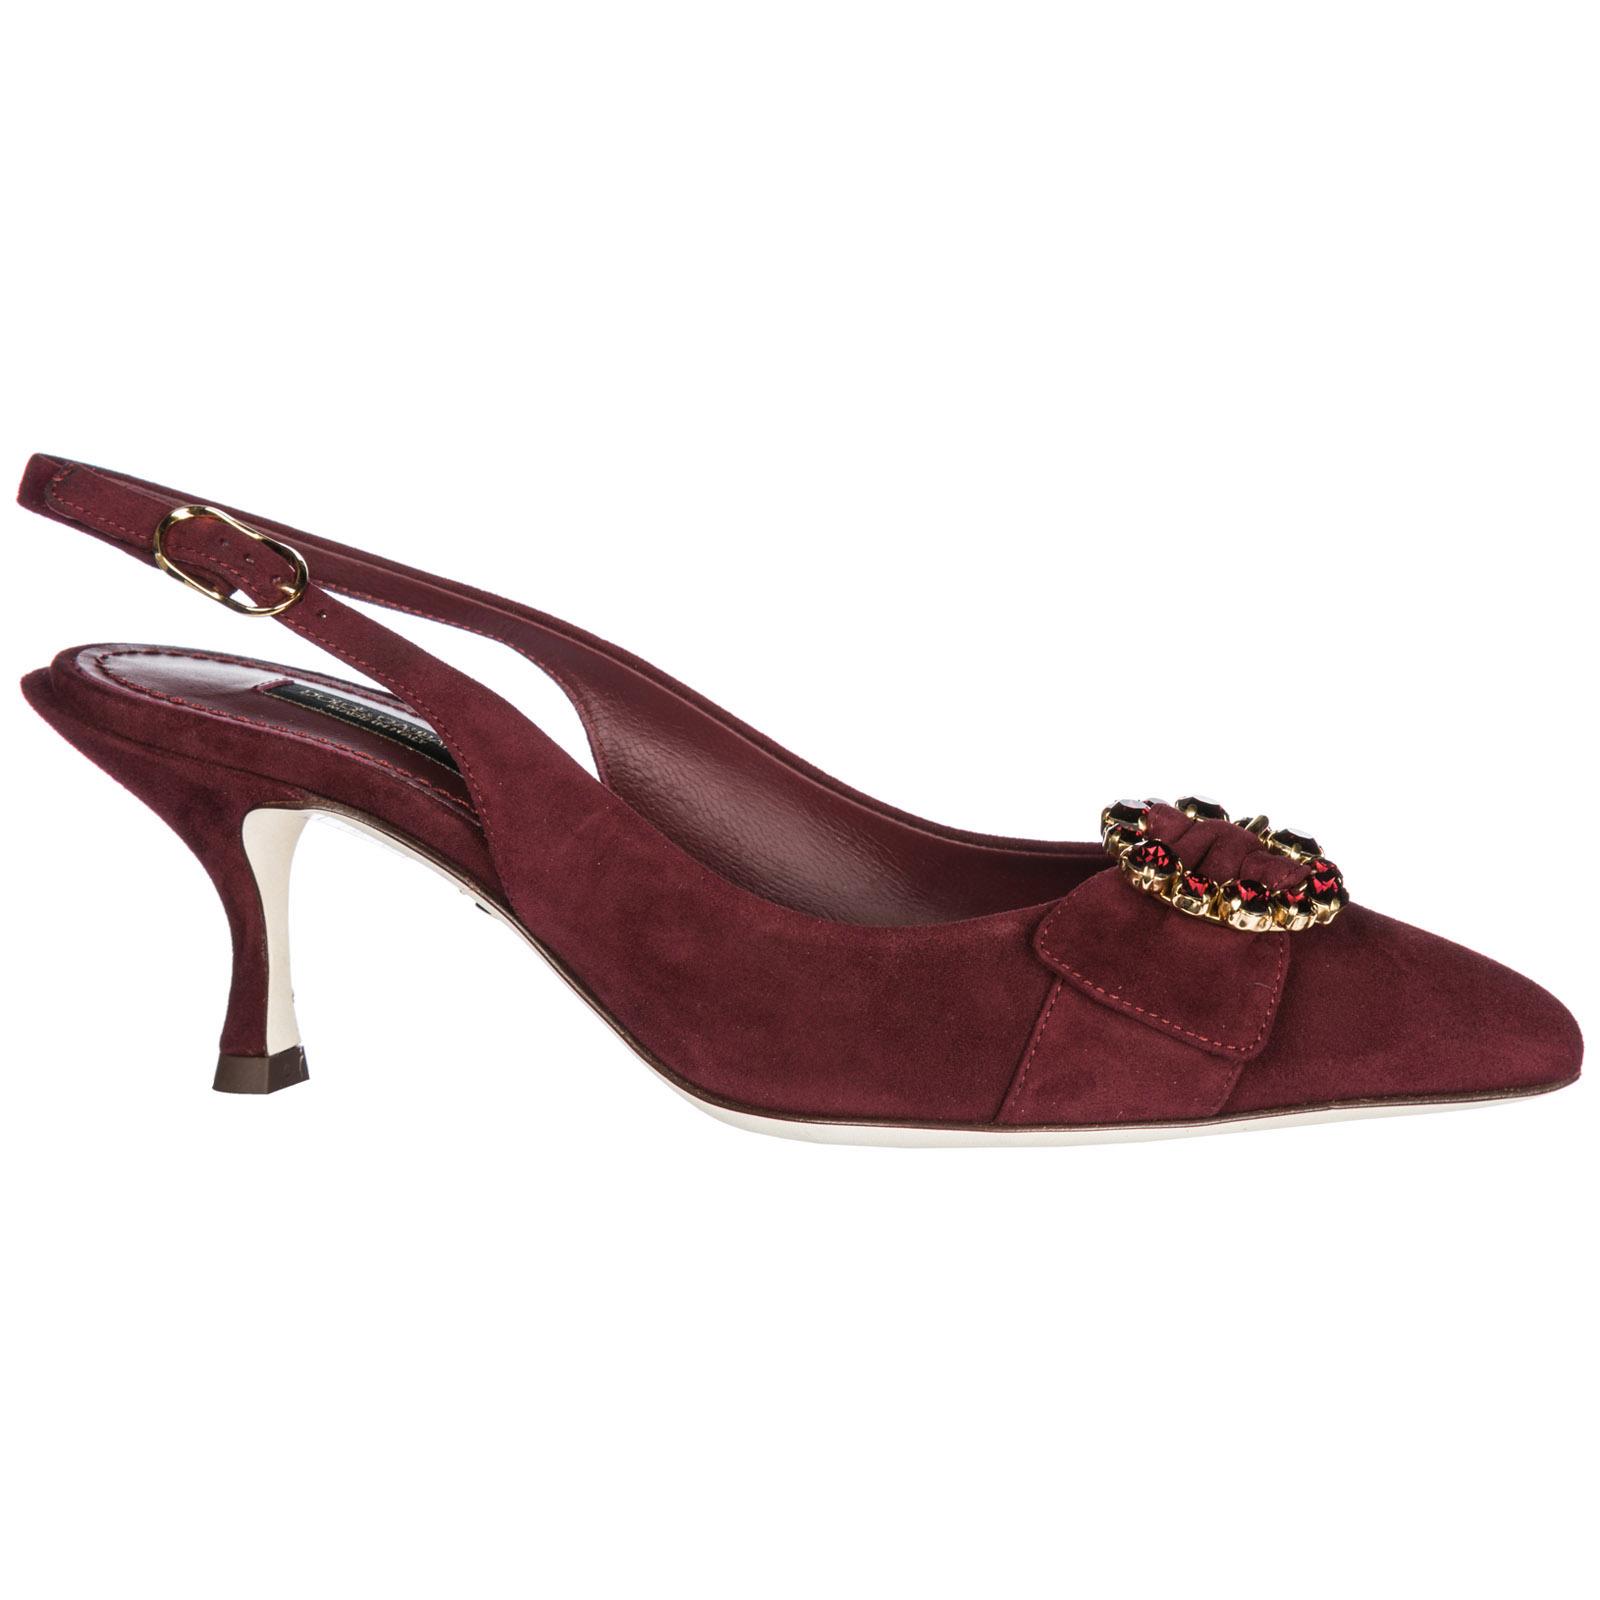 Dolce & Gabbana Suede Bellucci Slingback Pumps in Bordeaux (Red) - Lyst